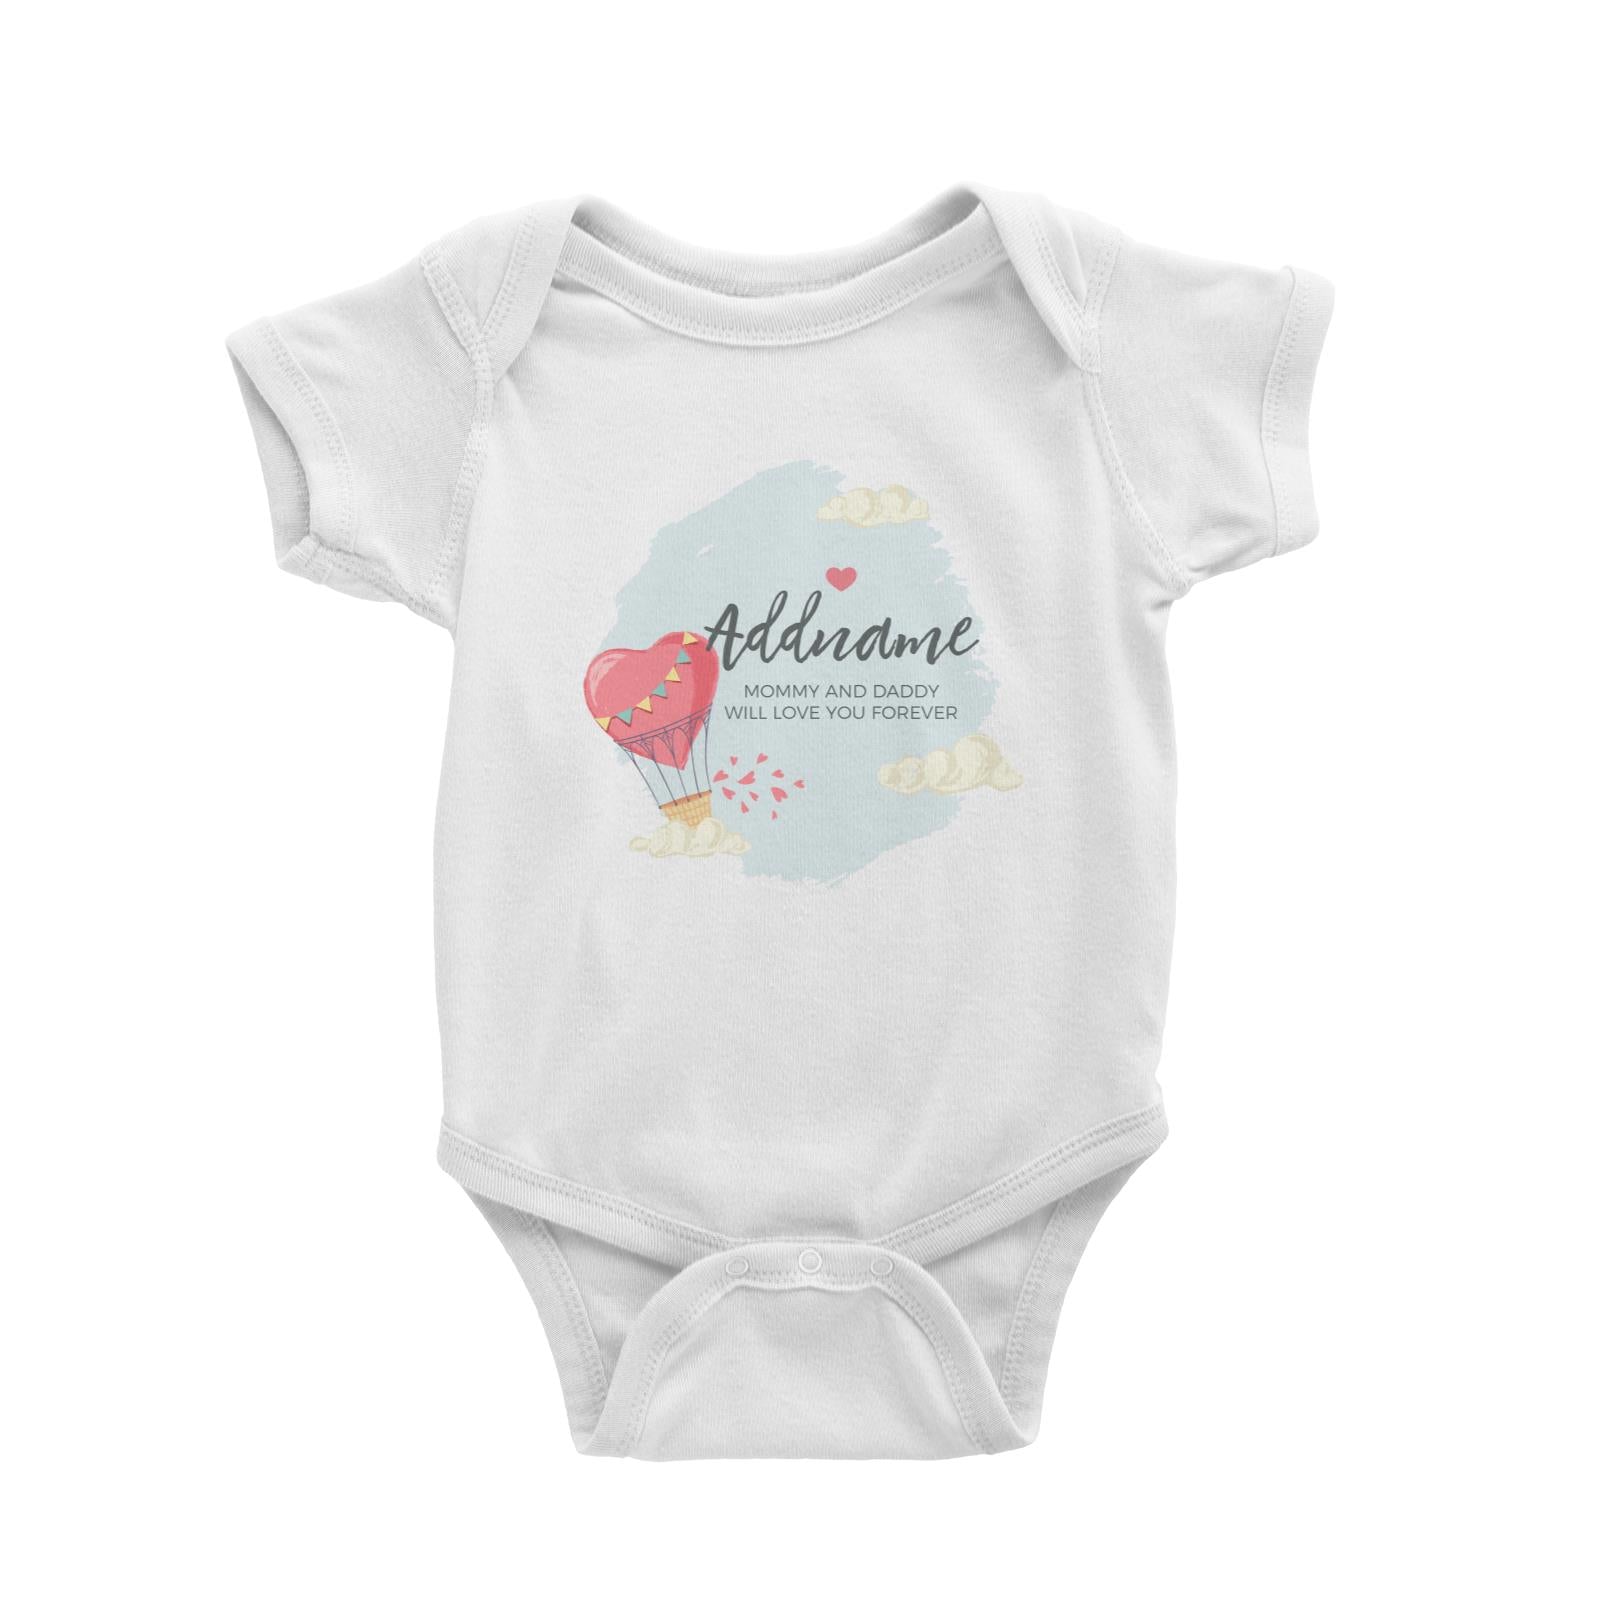 Heart Shaped Hot Air Balloon with Hearts and Clouds Personalizable with Name and Text Baby Romper